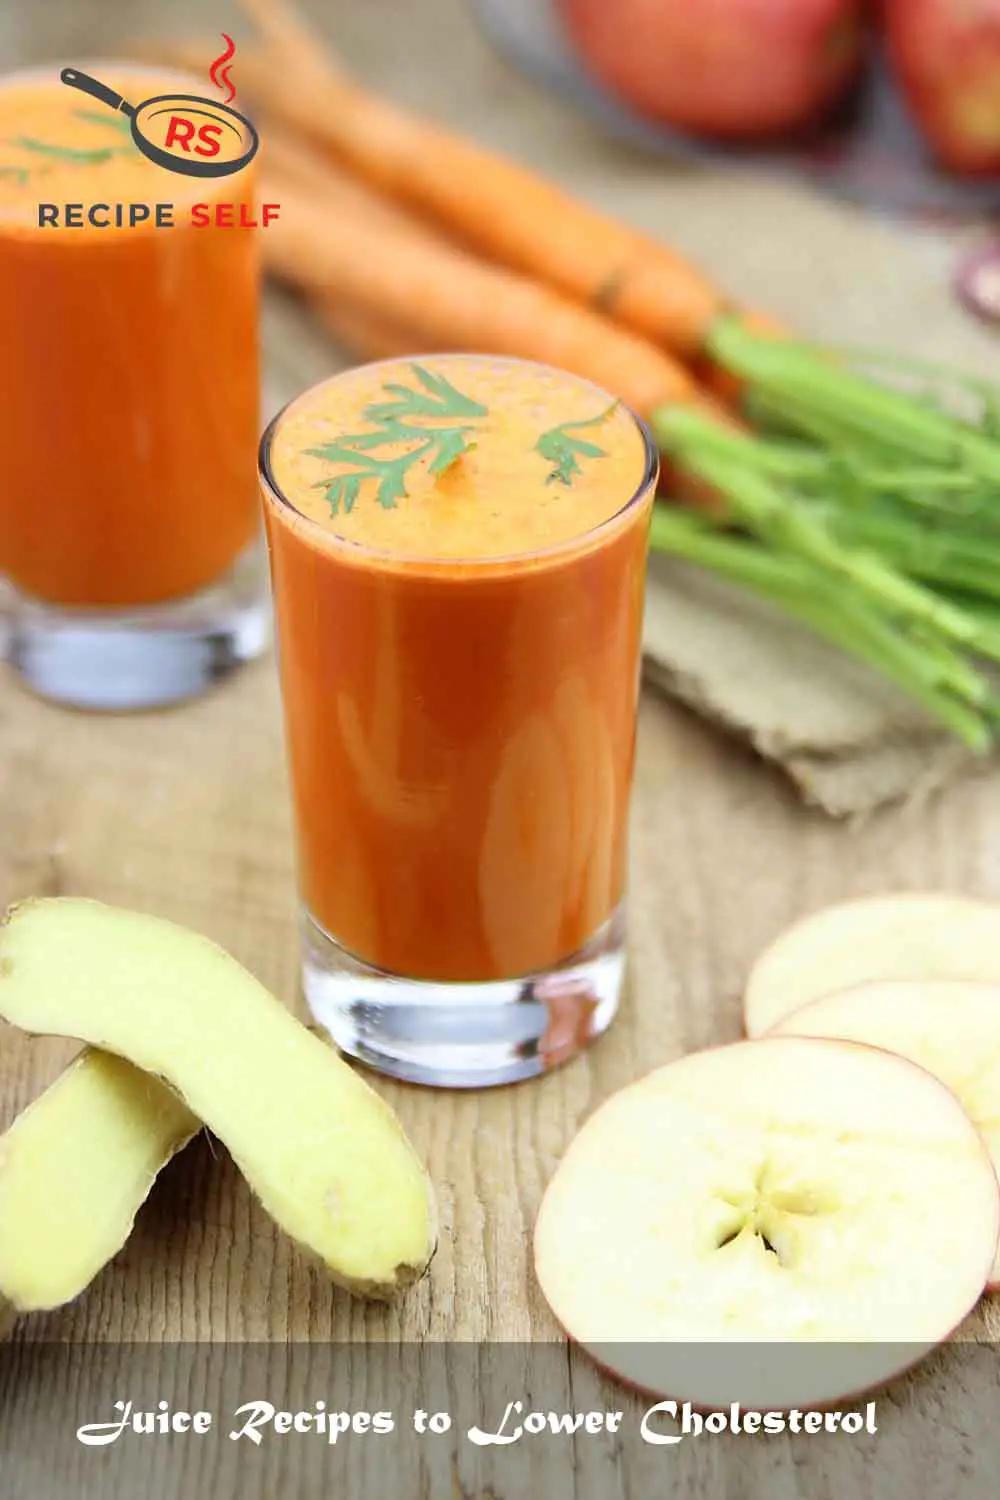 Juice Recipes to Lower Cholesterol